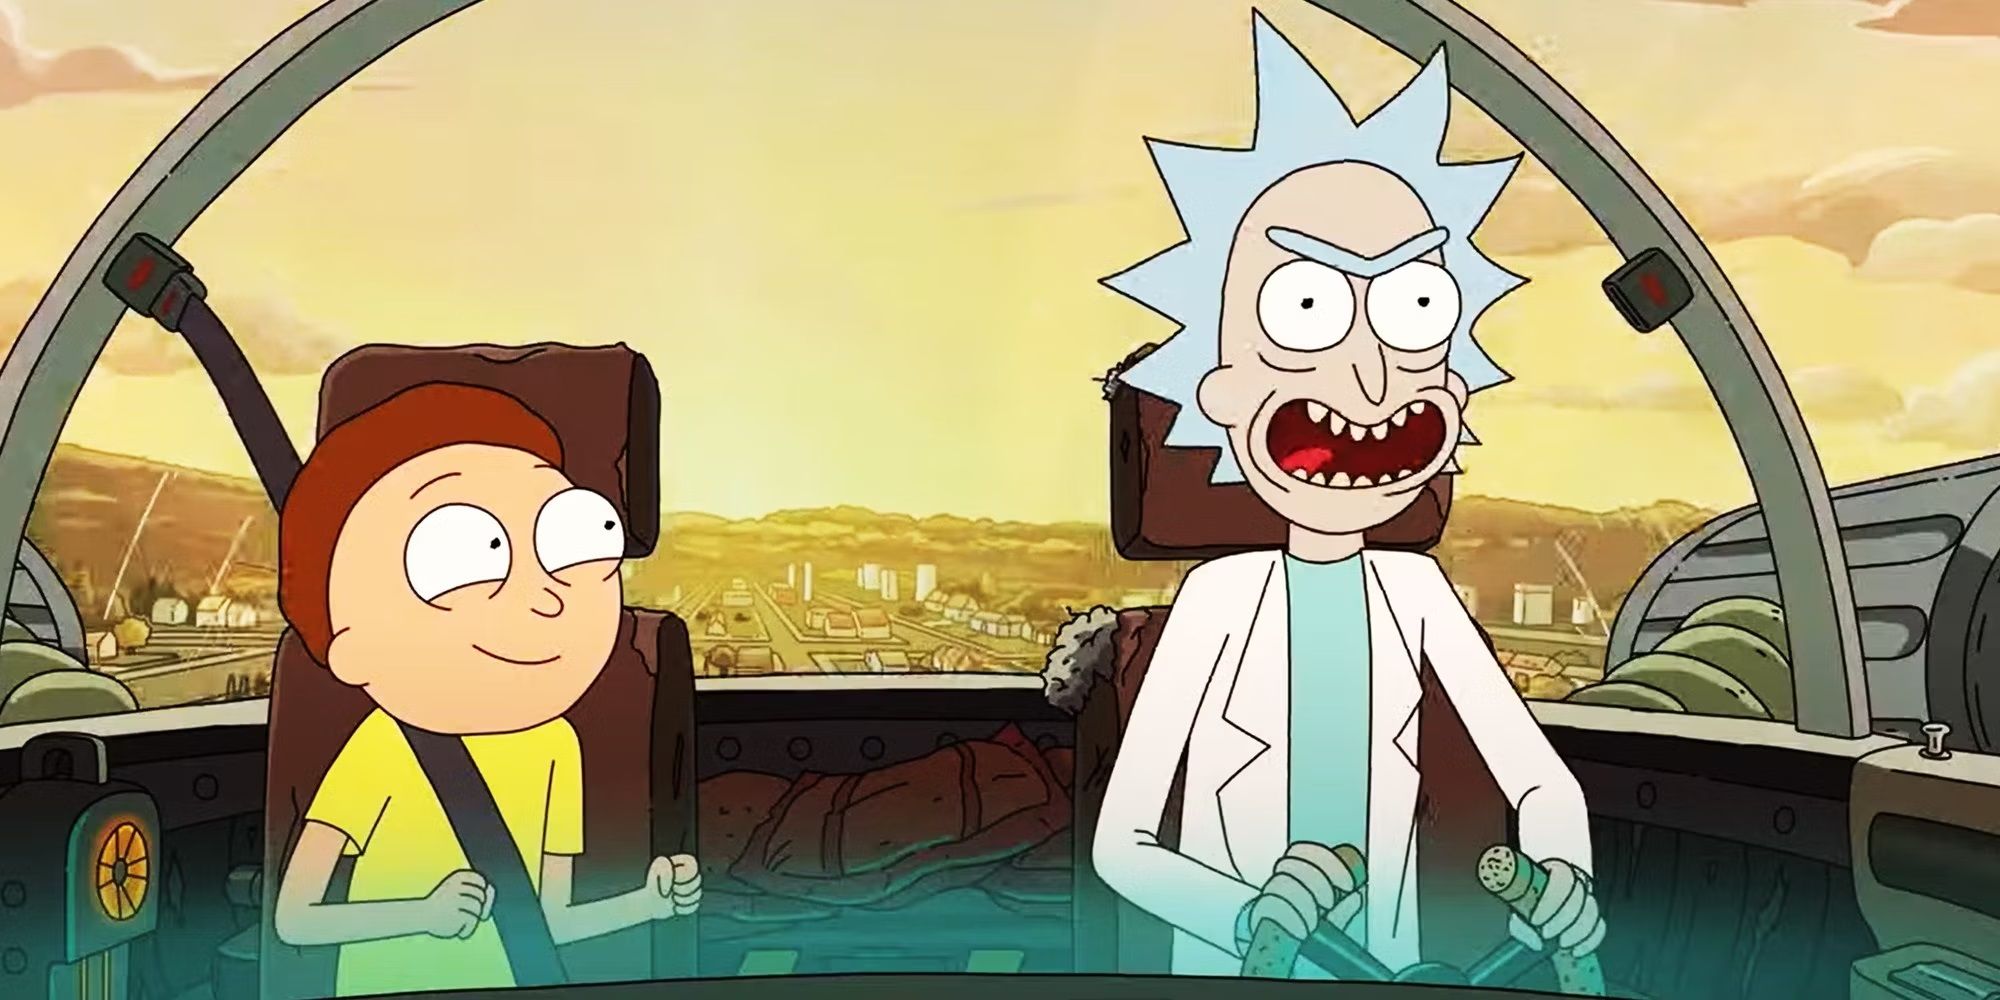 Rick flying with Morty in Rick and Morty